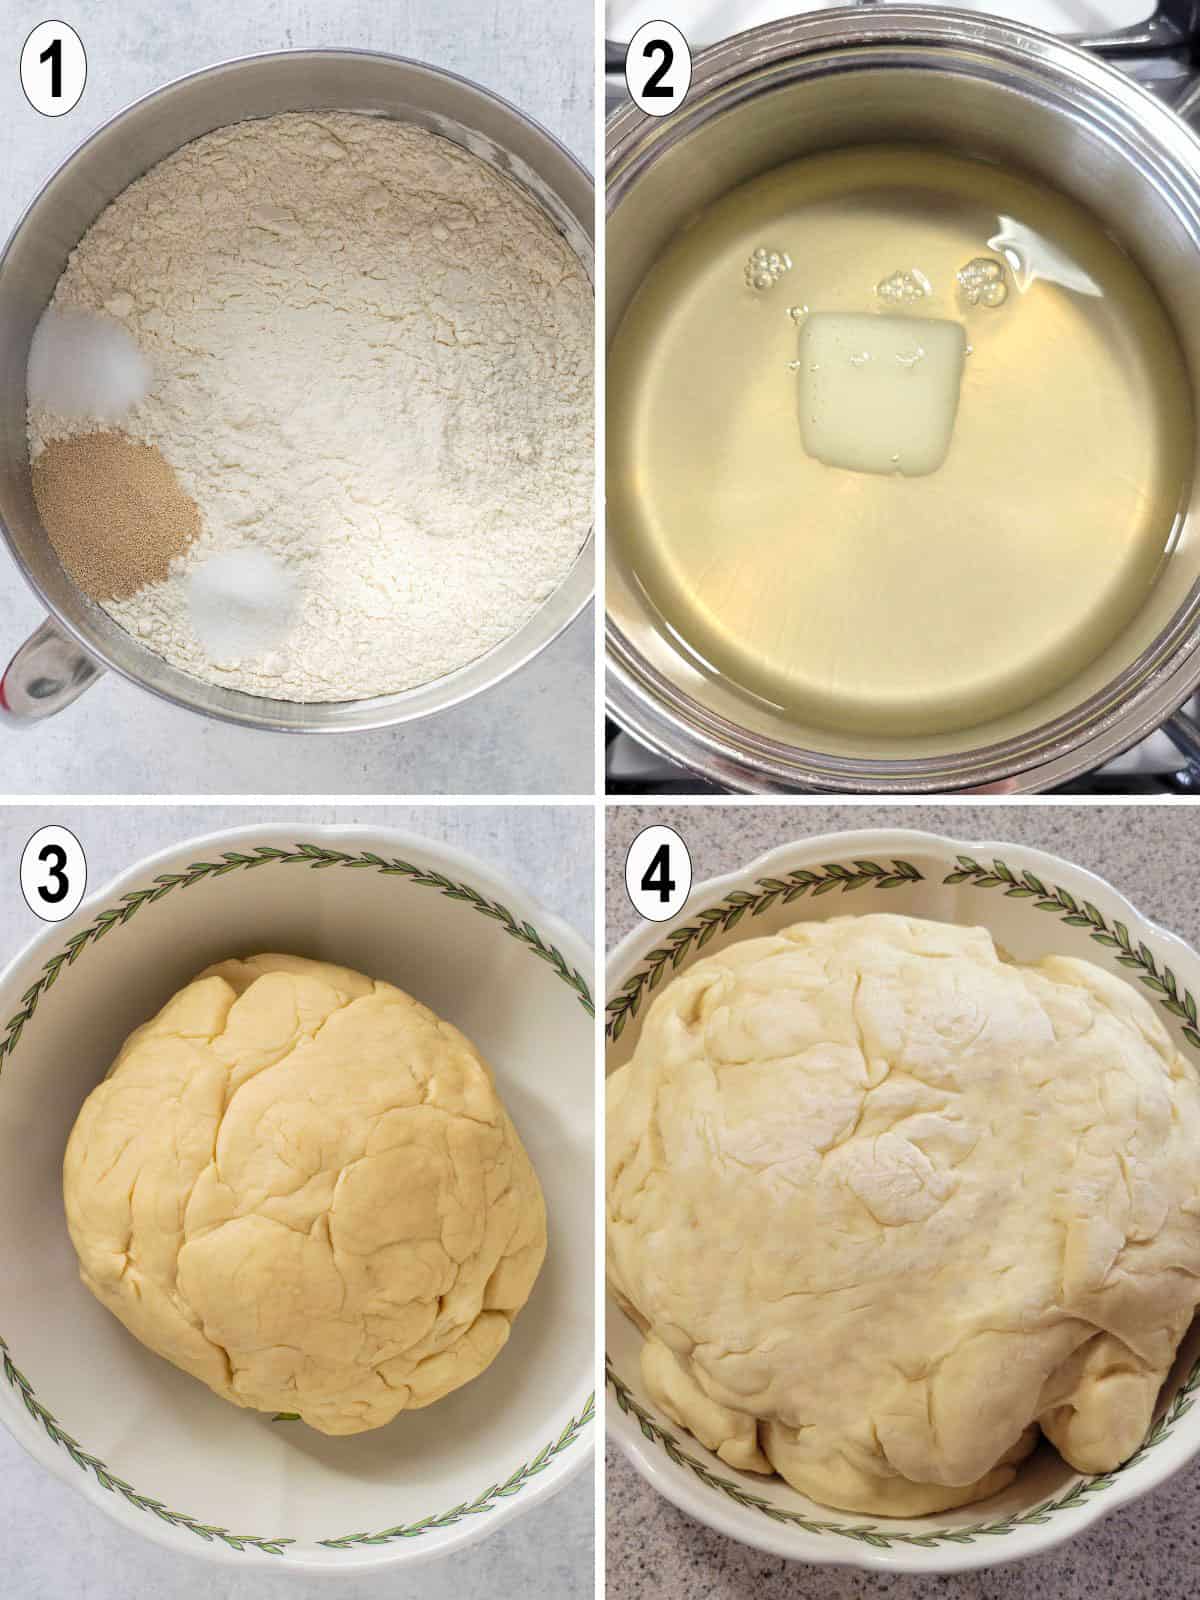 dough ingredients mixed in bowl with melted lard to form dough ball.